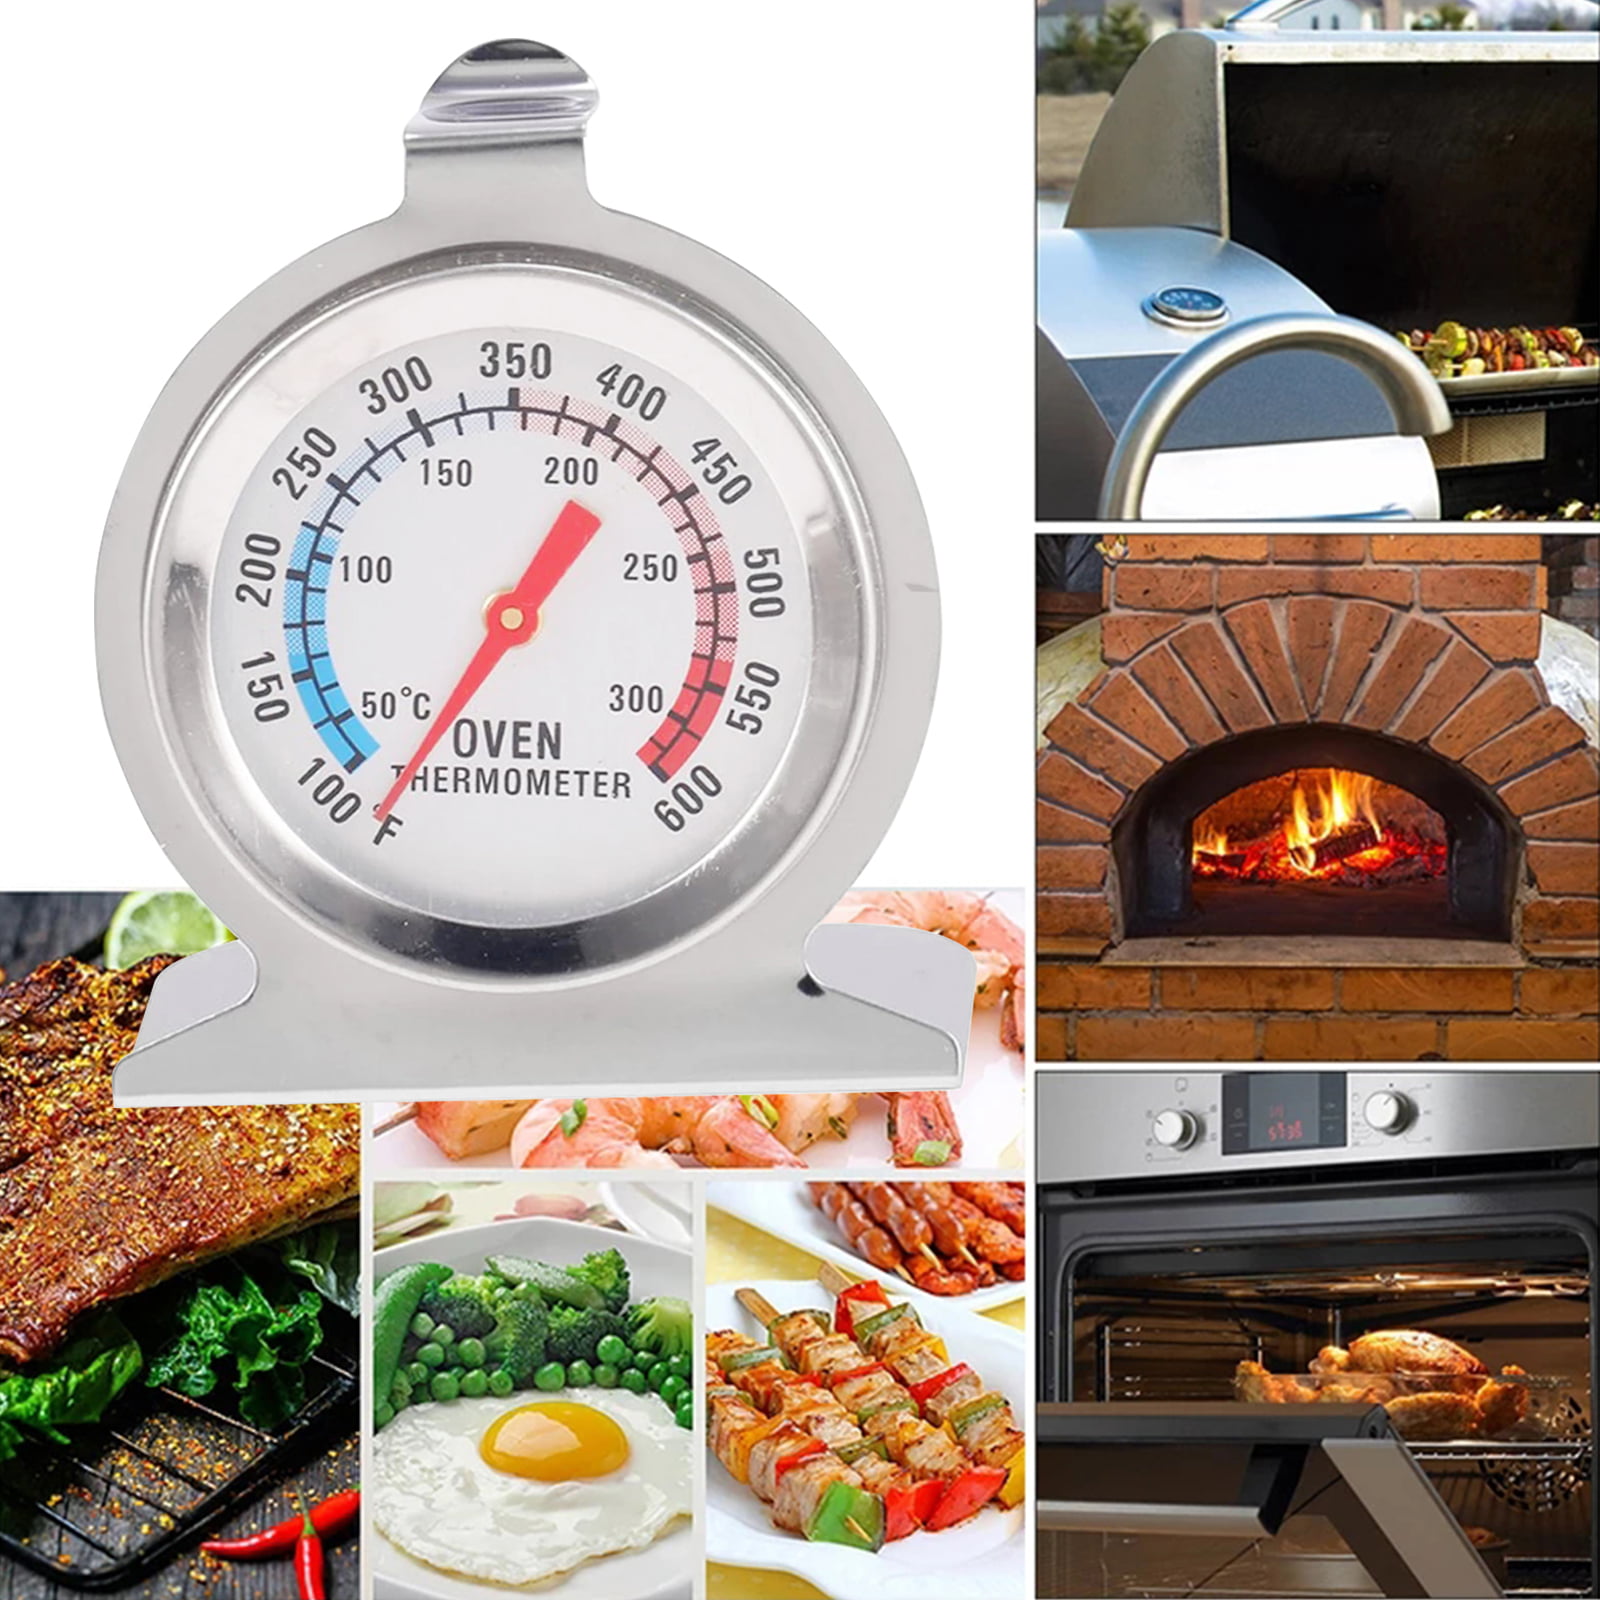 100-600 Degrees Fahrenheit Oven Grill Fry Chef Smoker Instant Read Stainless Steel Thermometer with Hook and Panel for BBQ Baking E-outstanding Oven Thermometer 50-300 Degree Centigrade 